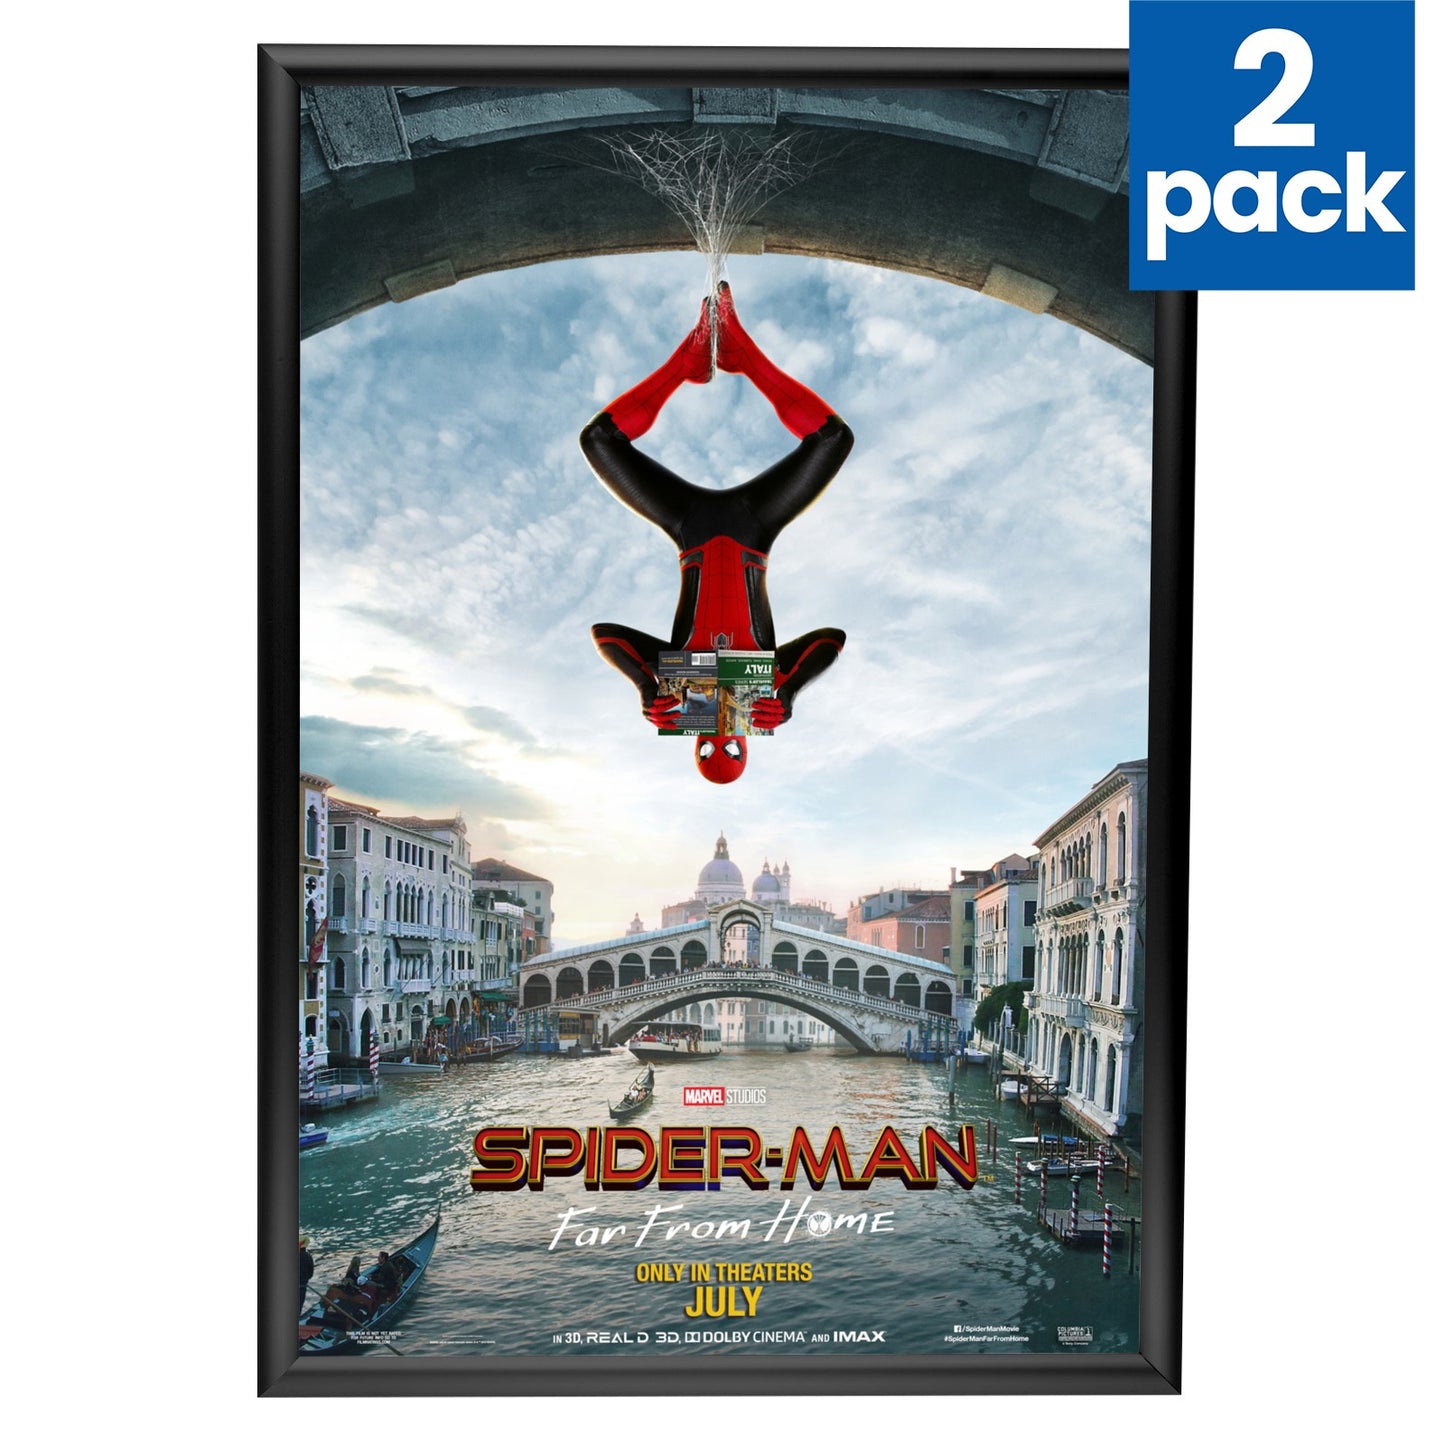 Twin-Pack Black 24x36 Movie Poster Frame - 1" Profile